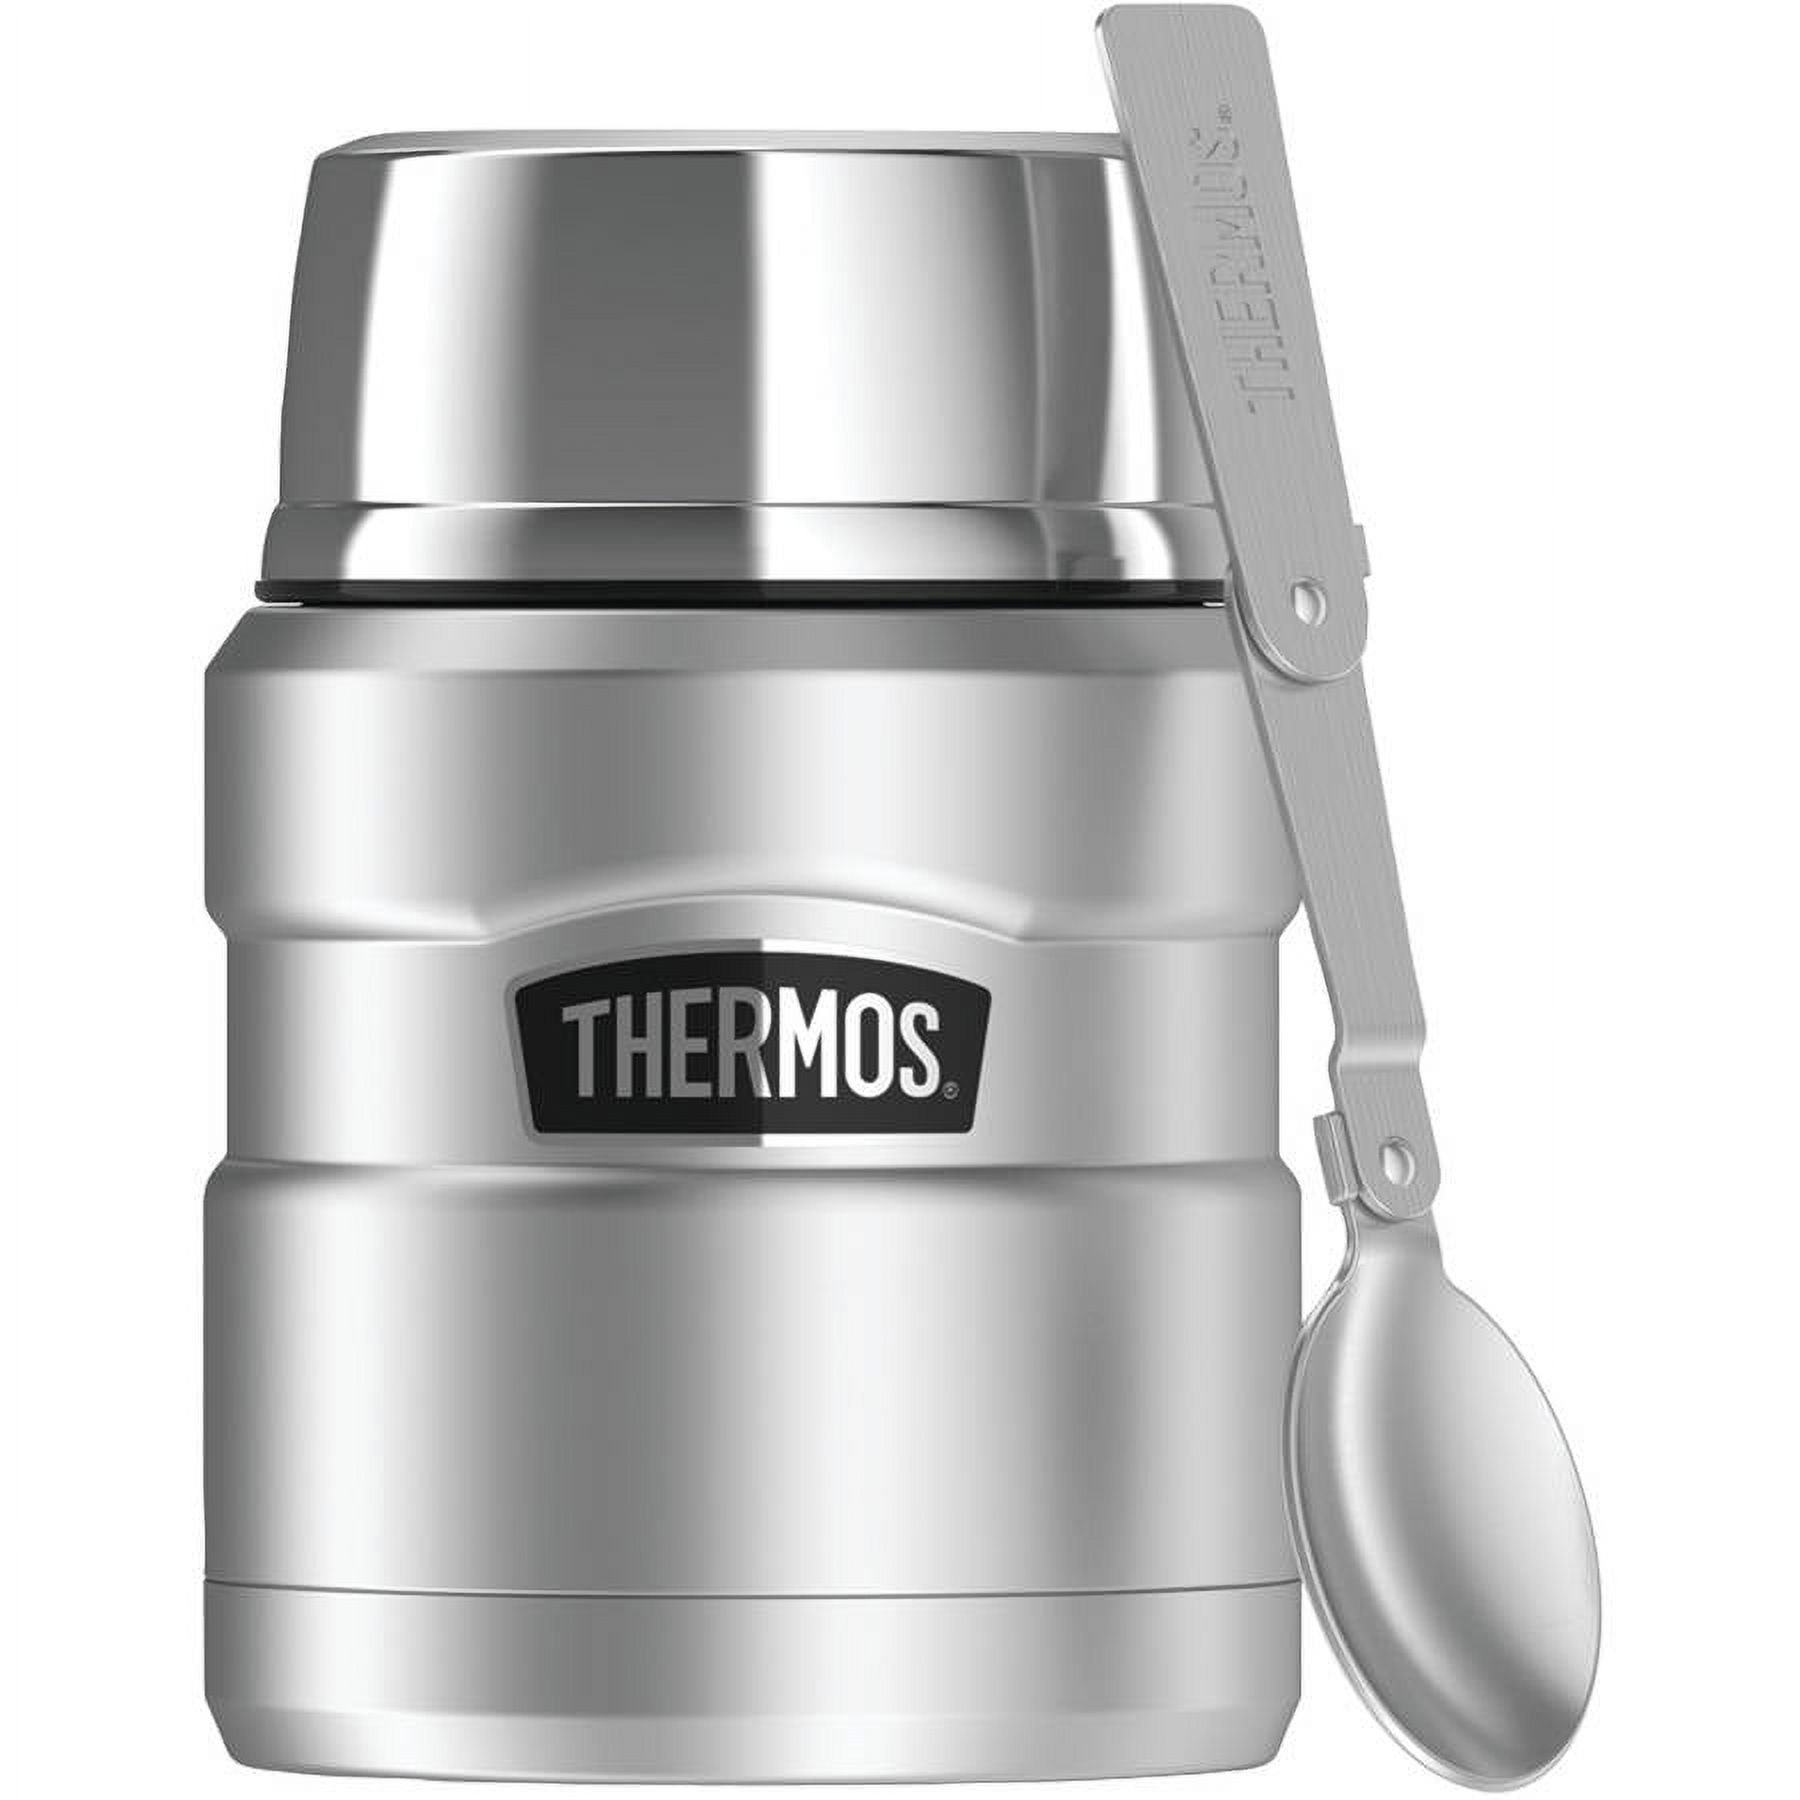 Thermos Stainless King 16 Ounce Food Jar with Folding Spoon, Matte Stainless - image 1 of 5